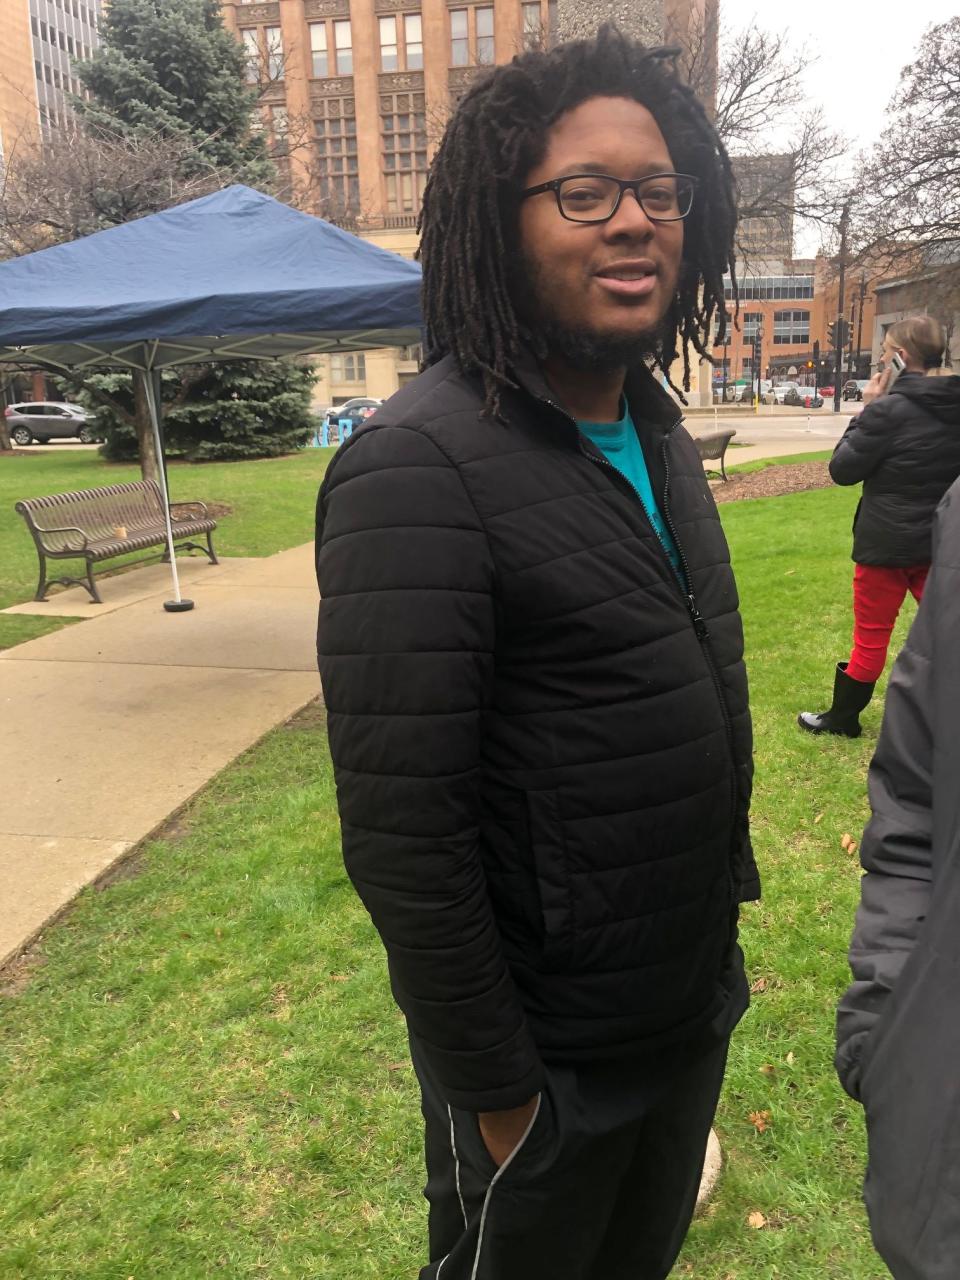 Xavier Thomas attends a Red Arrow Park event in support of the Dontre Hamilton family on Saturday. The city of Milwaukee unveiled a new memorial for Hamilton, which his family hopes can help make Milwaukee a better, more just city.